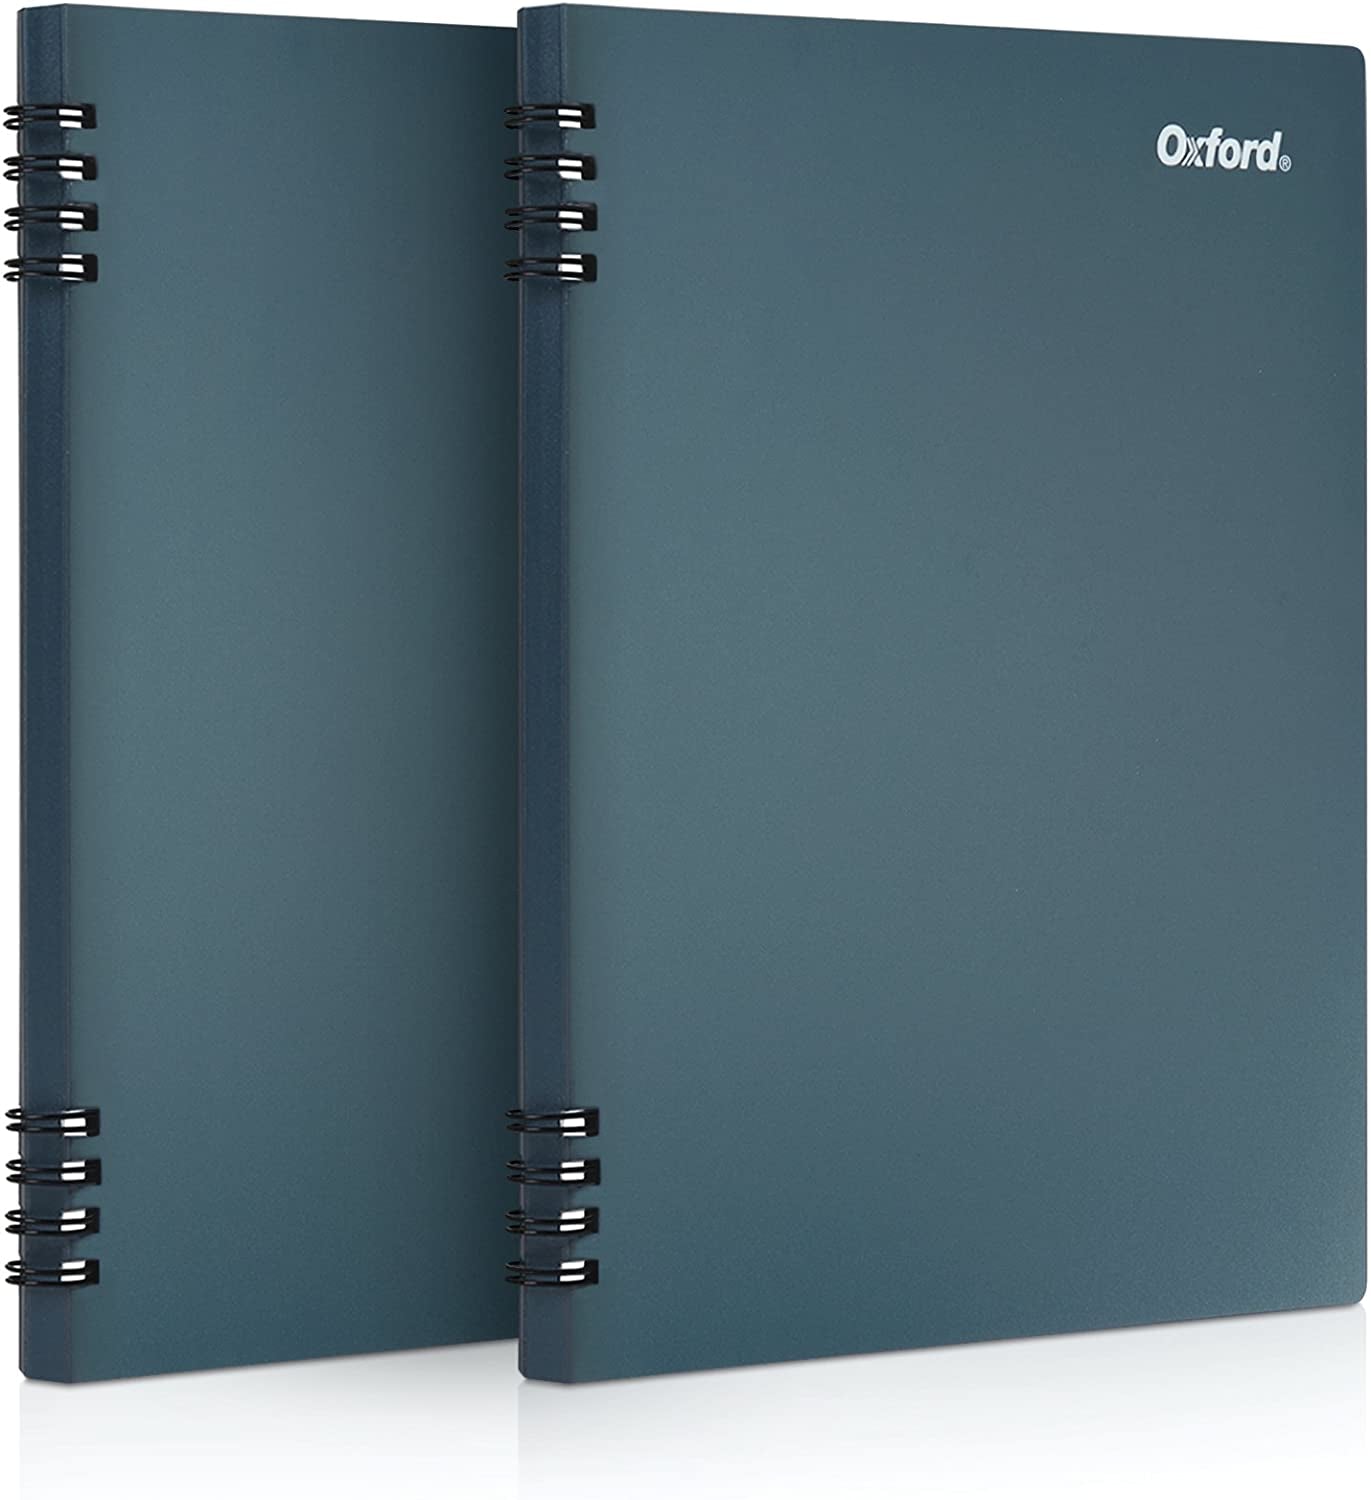 Stone Paper Notebook, 8-1/2" X 11", Blue Cover, 60 Sheets, 2 Pack (161646)